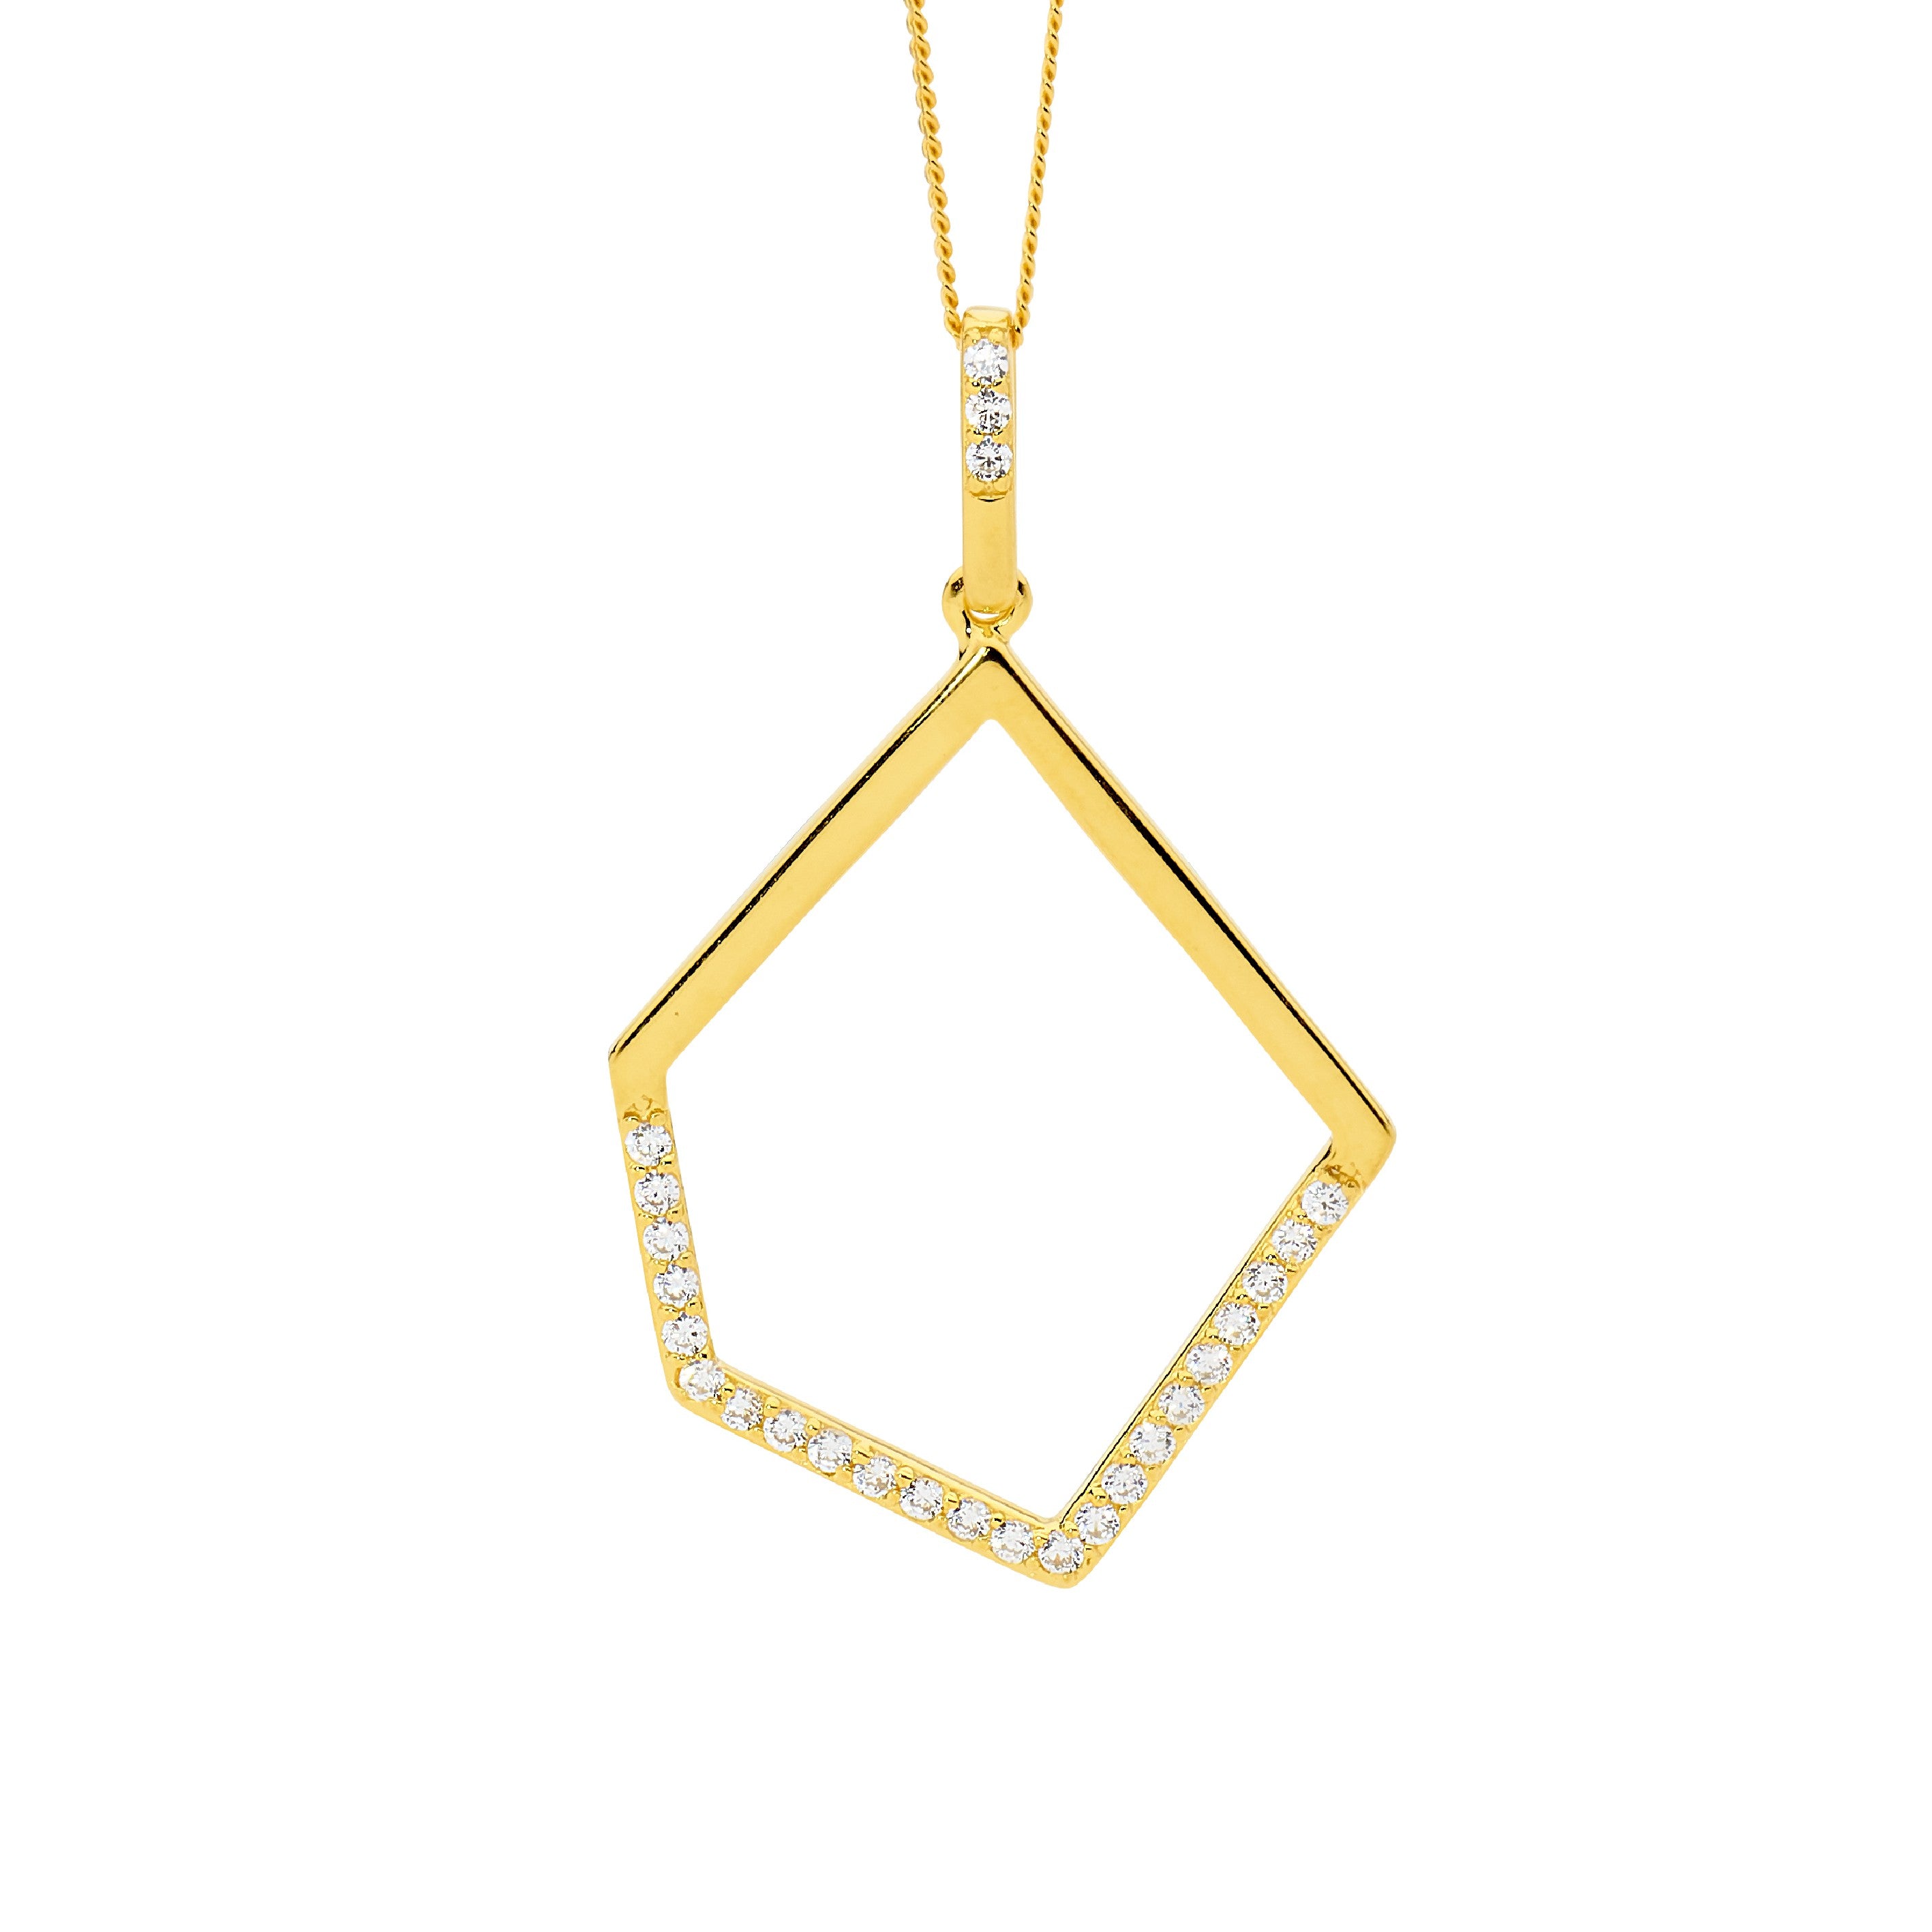 Gold plated sterling silver cubic zirconia pendant